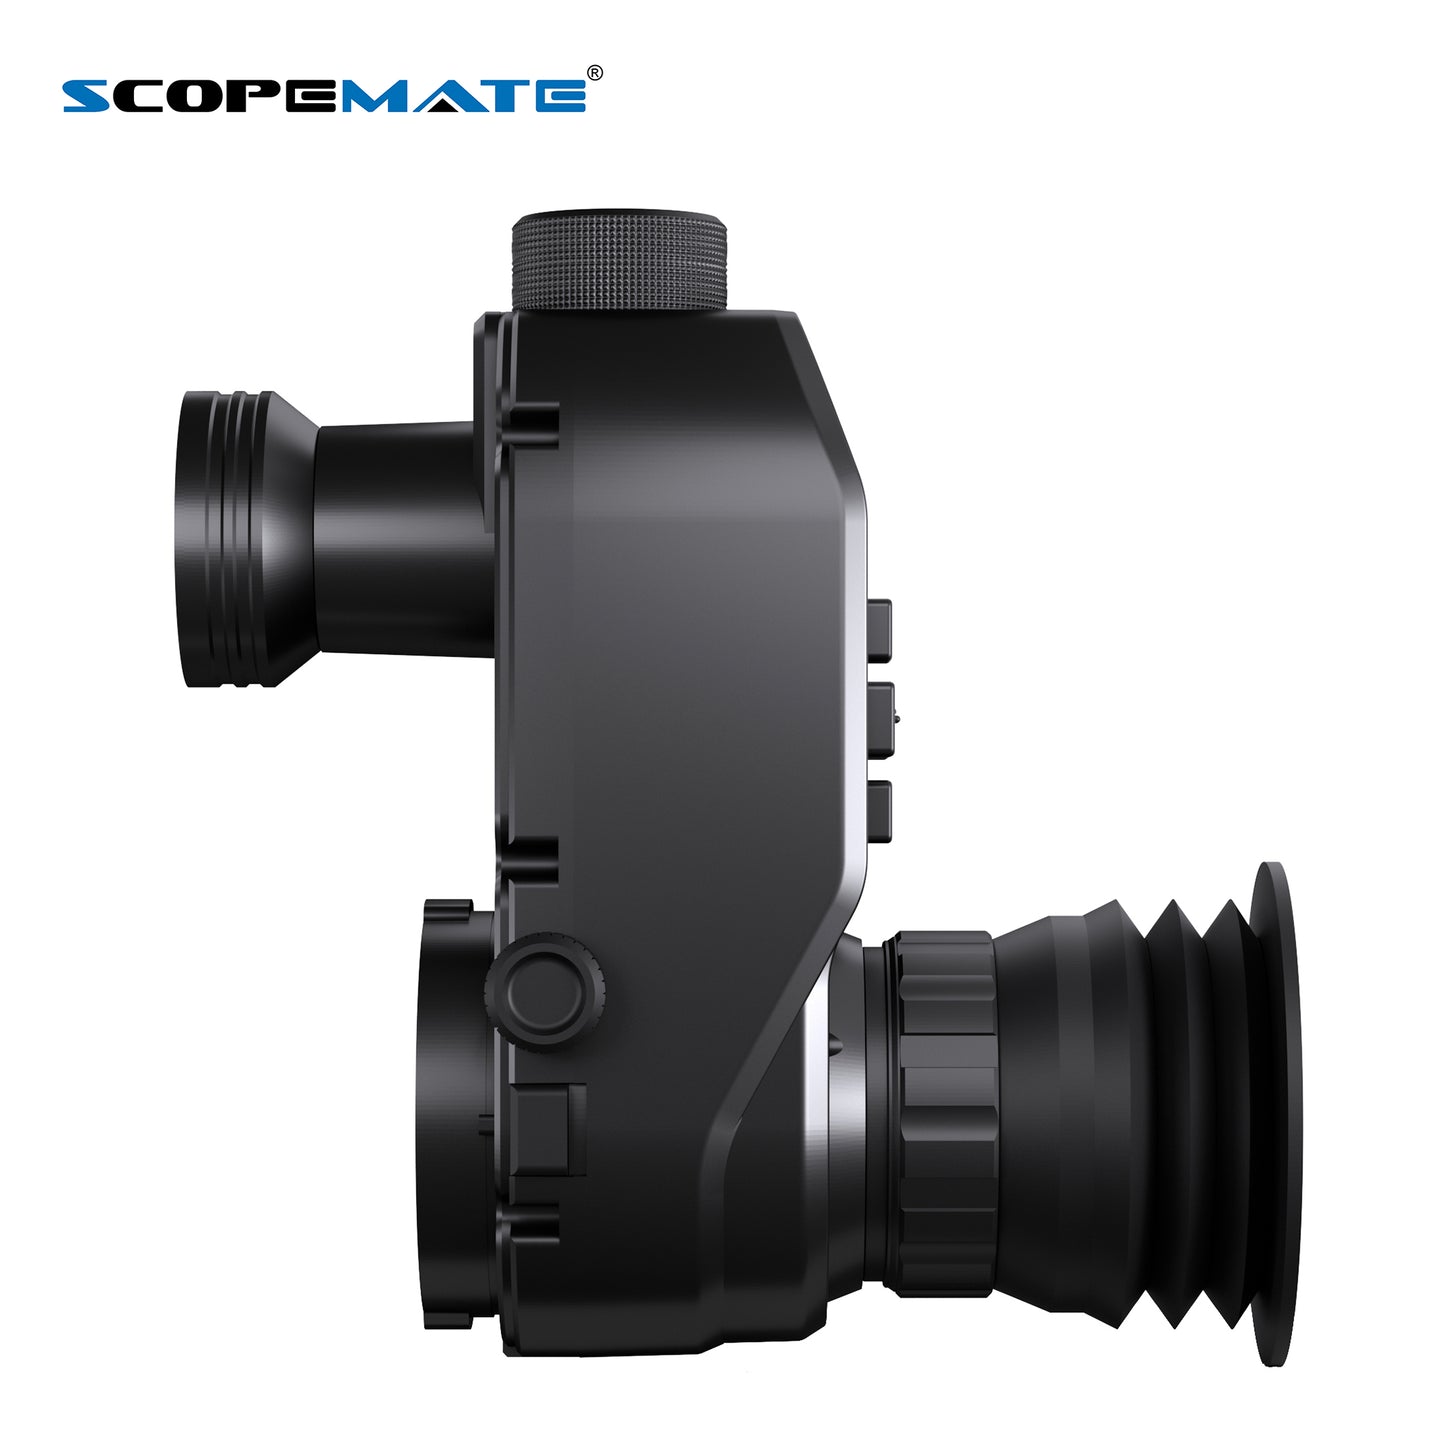 Scopemate Innovative Compact Design Digital Day and Night Vision Scope Camera NVS12